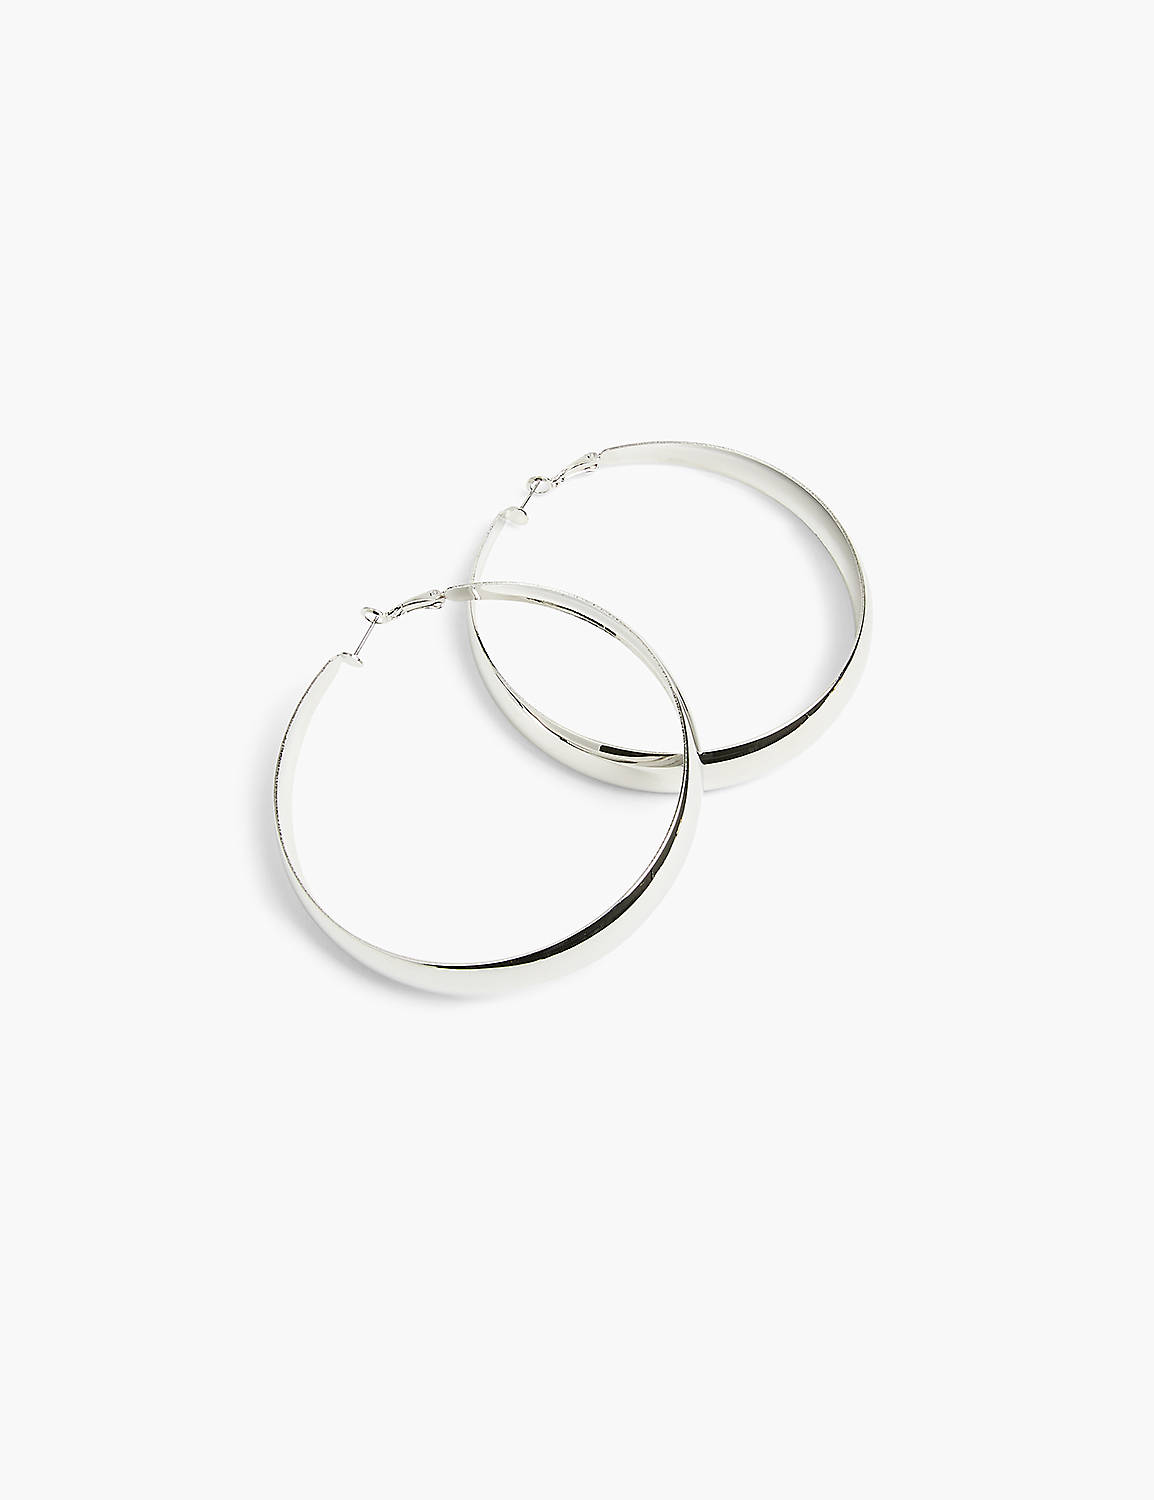 EXTRA LARGE HOOP EARRING Product Image 1